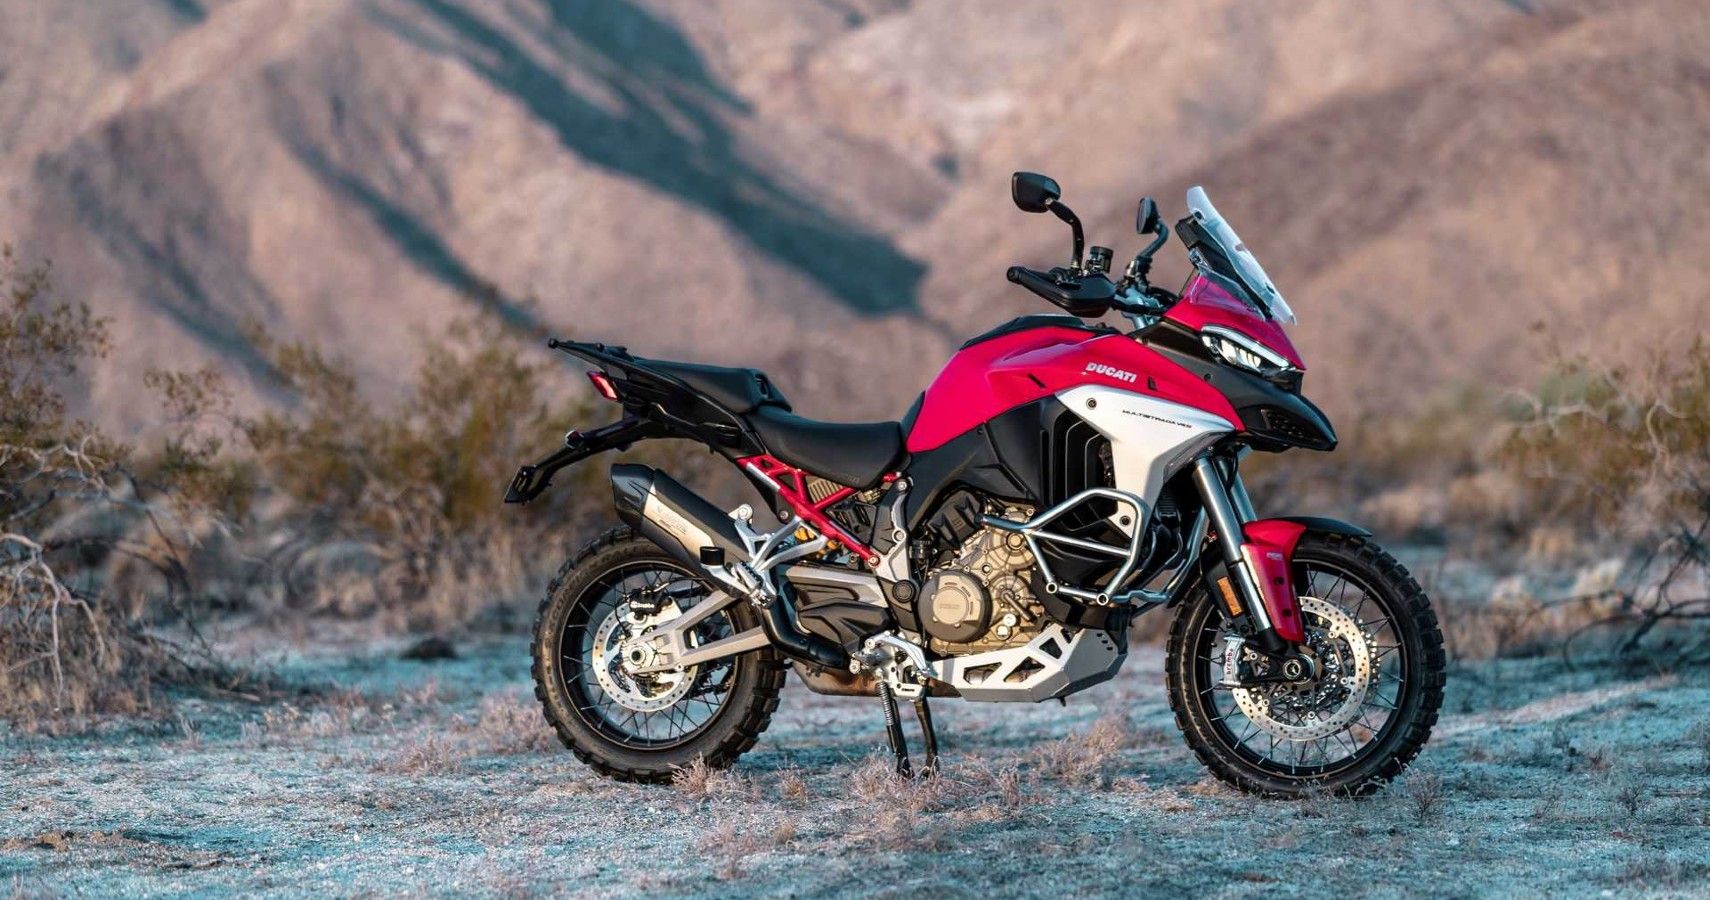 An Image Of A Red Ducati Multistrada V4